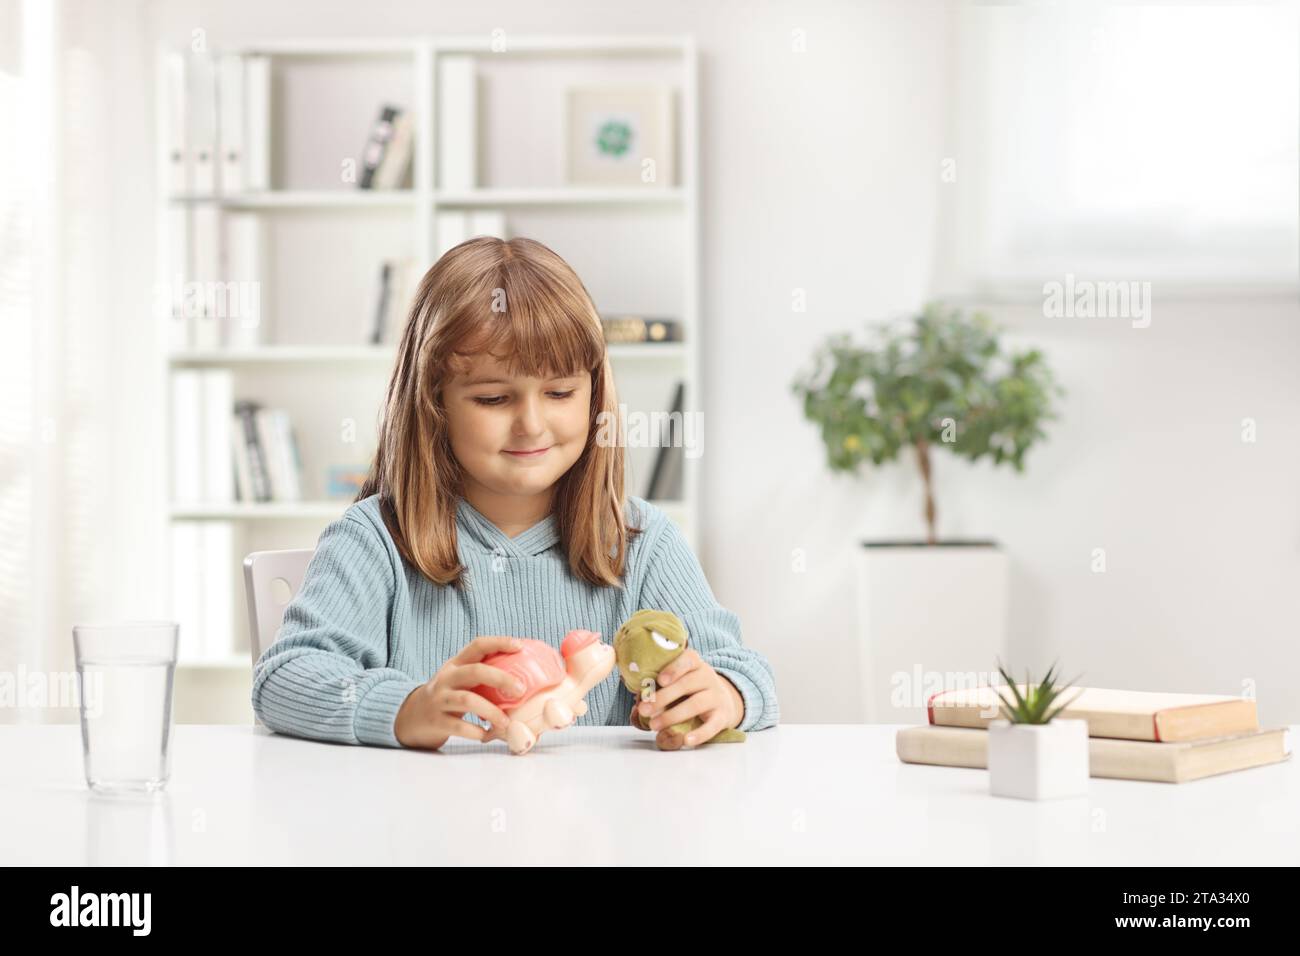 Cute little girl sitting at home and playing with animal toys Stock Photo